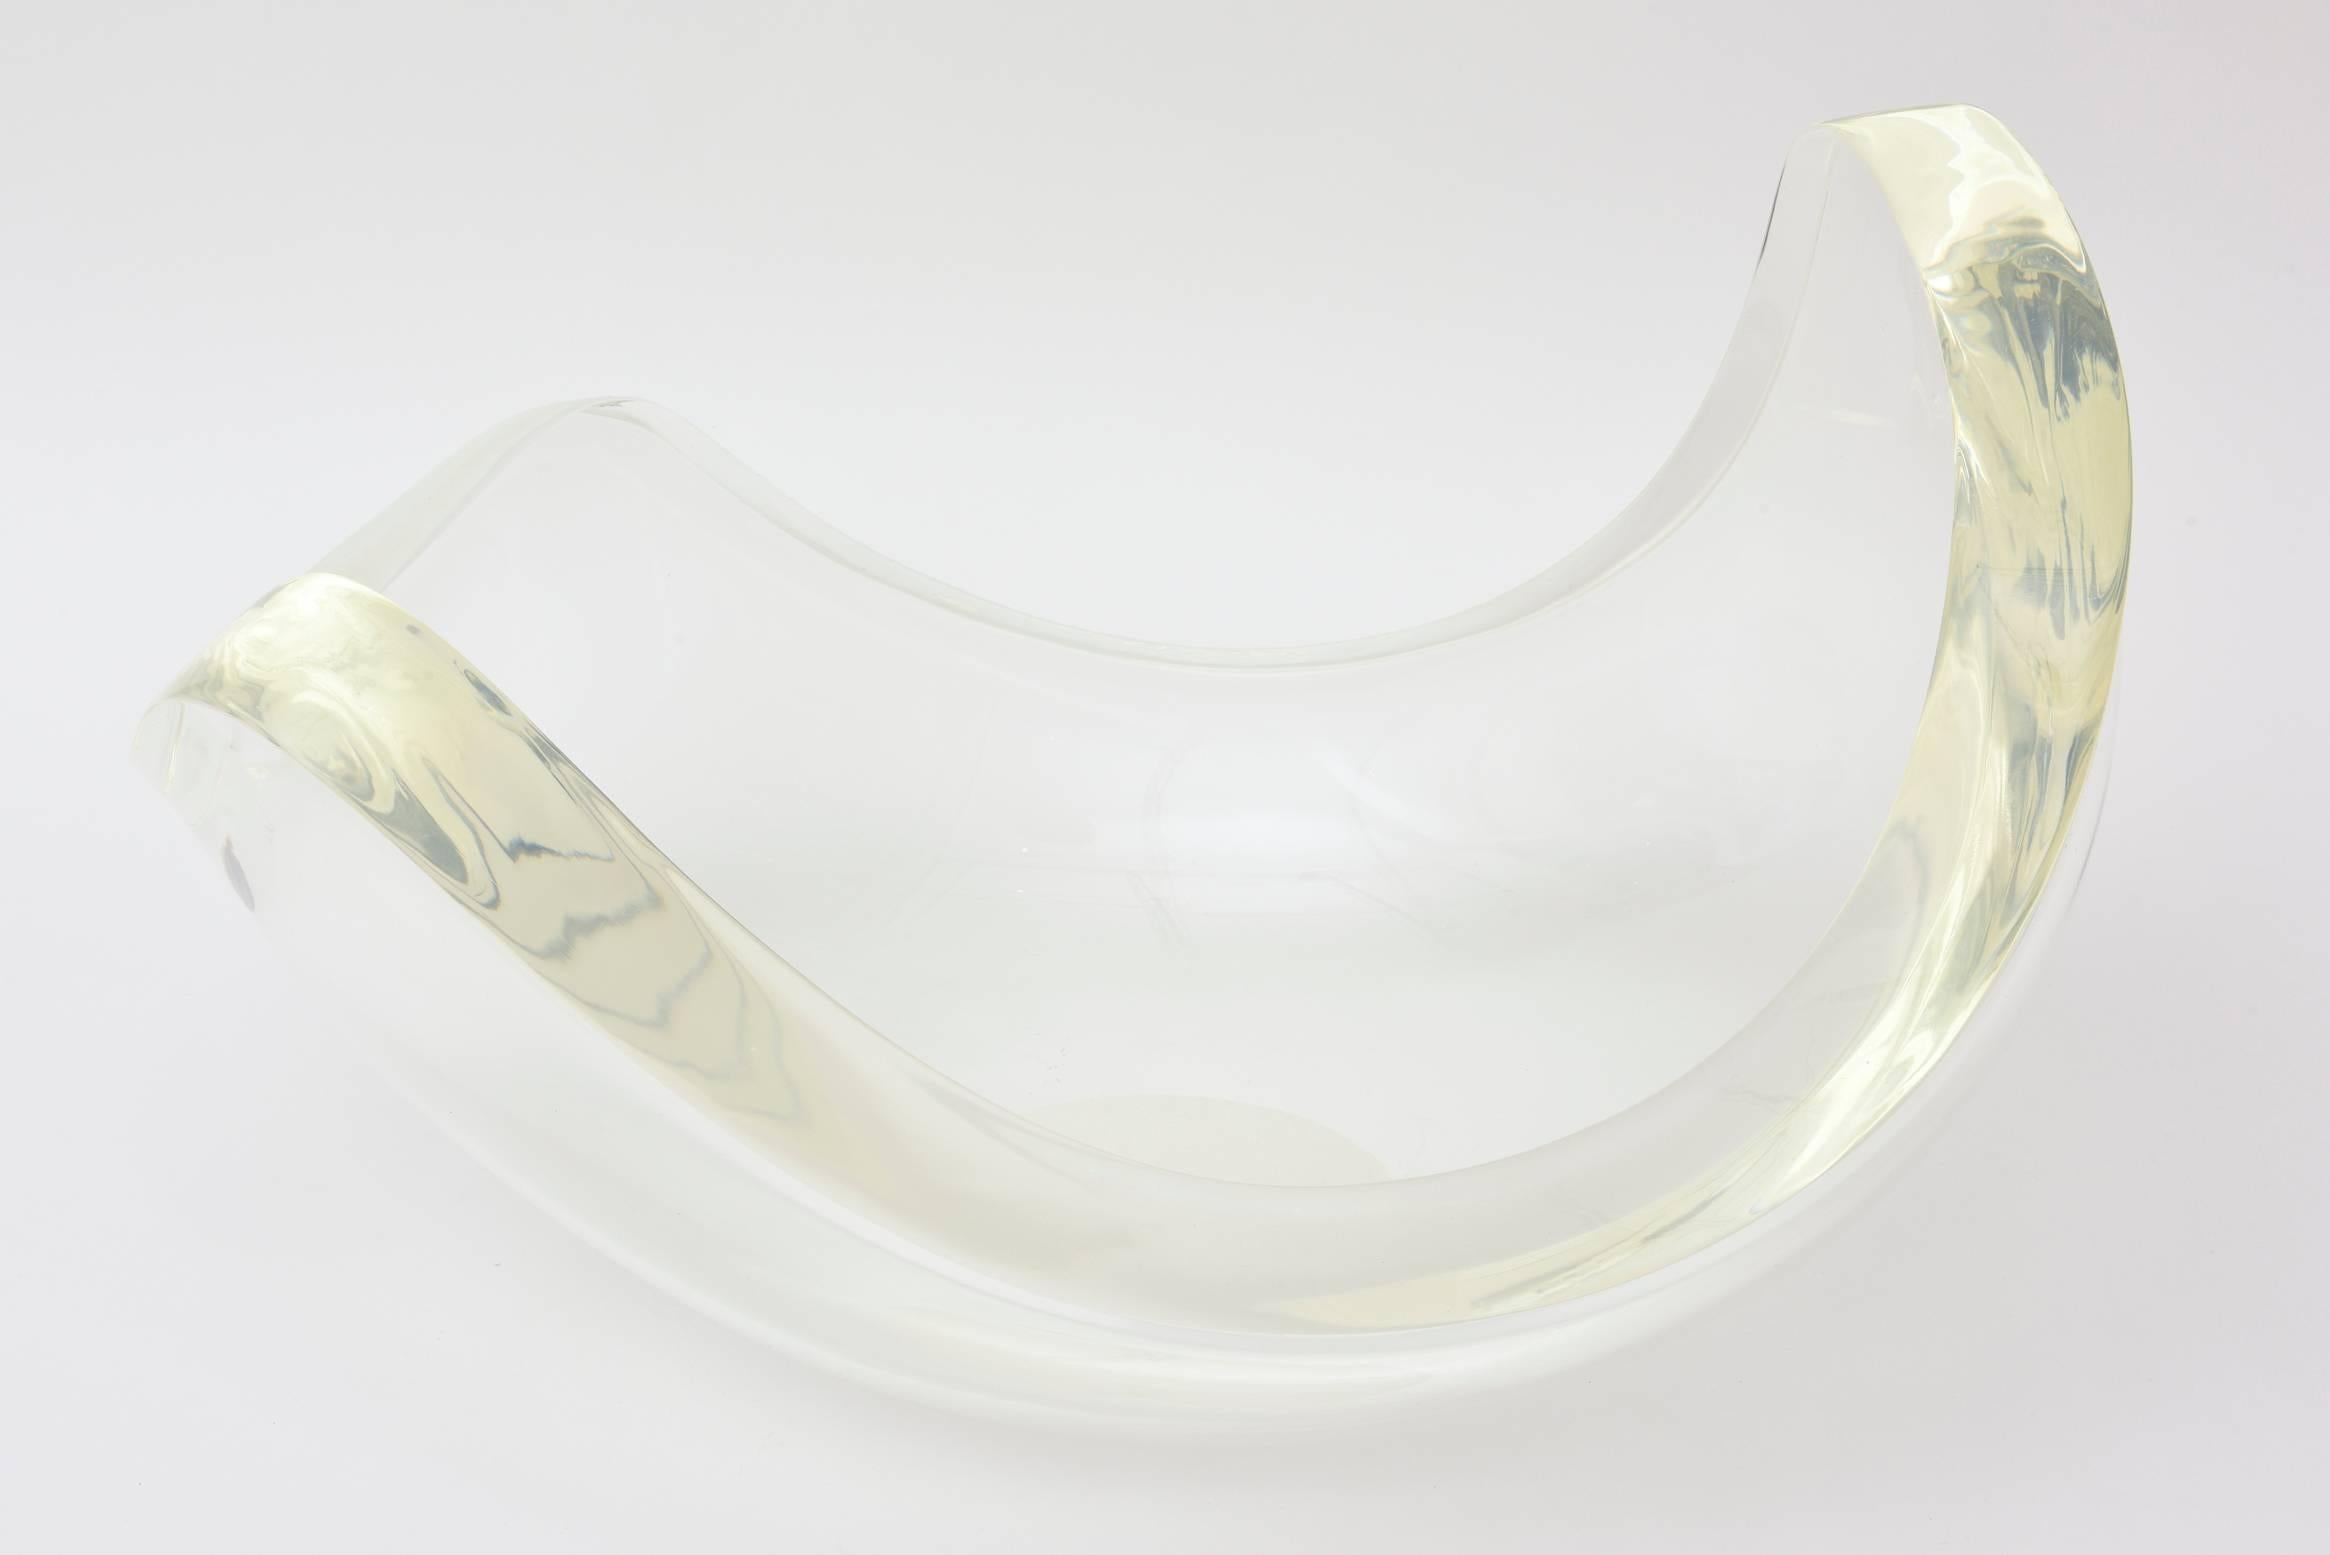 This most monumental organic/sculptural biomorphic shaped thick Lucite bowl
is stunning. It is vintage and has three different height of the biomorphic points. The highest point is 10.5" H then 9.5" H then 7" H. From every angle, it